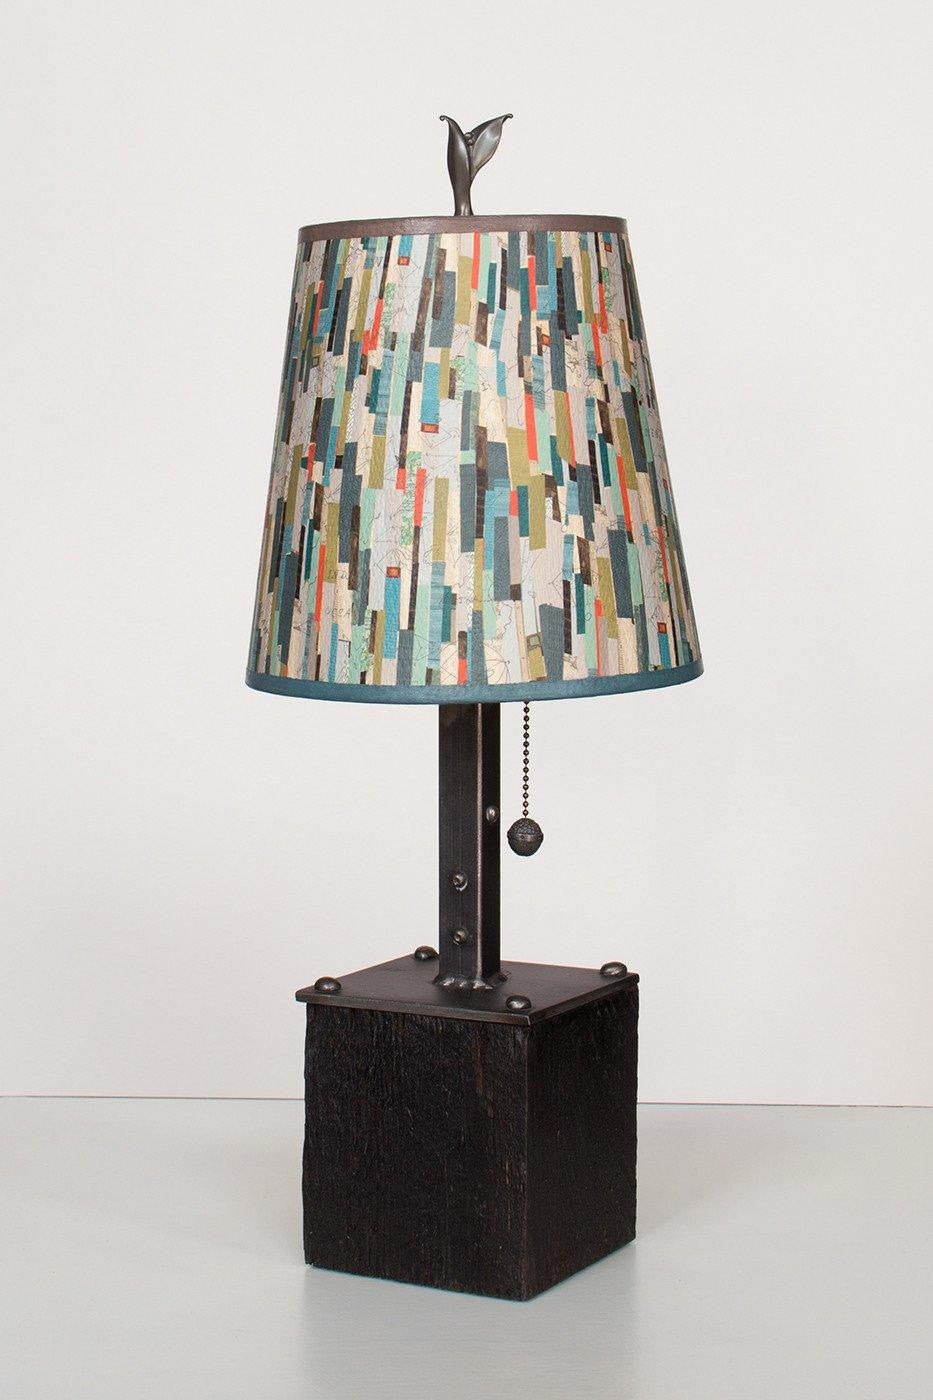 Janna Ugone & Co Table Lamps Steel Table Lamp on Reclaimed Wood with Small Drum Shade in Papers